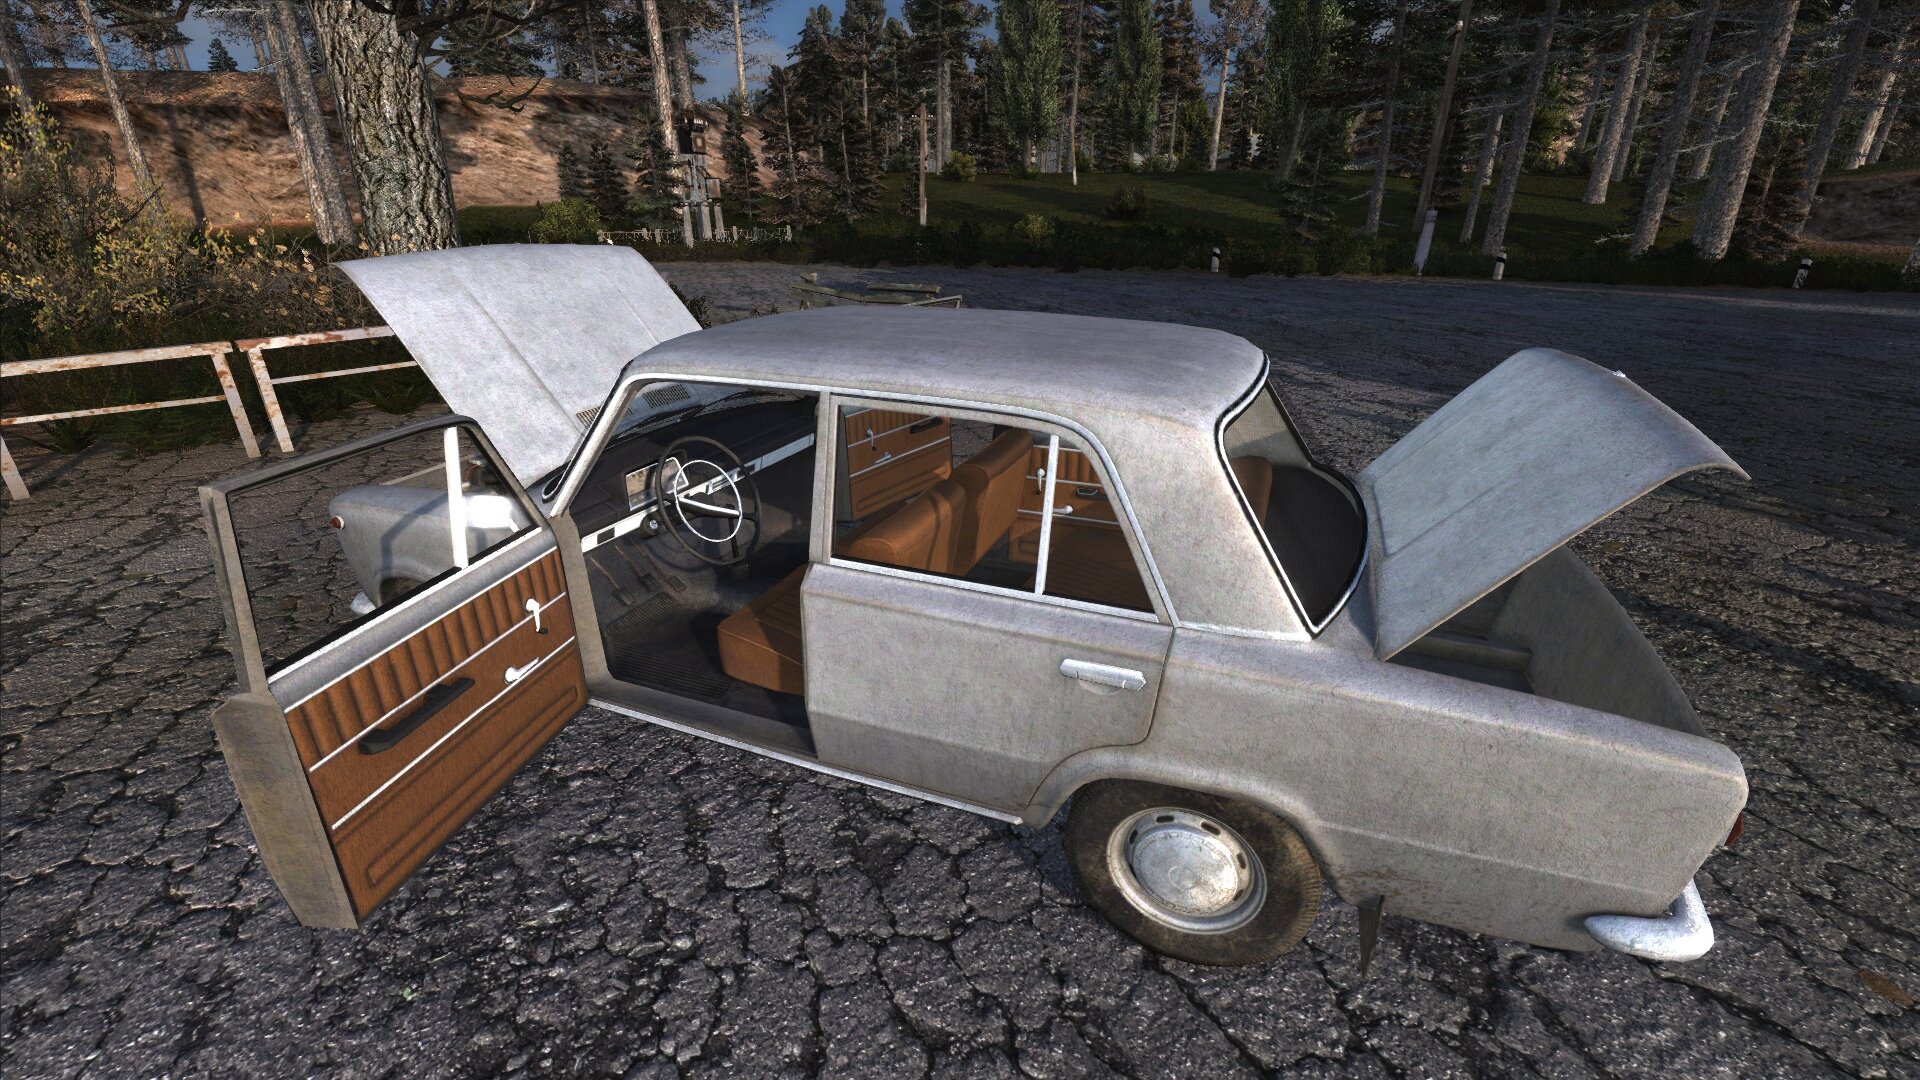 Lost alpha definitive car pack addon. Дефинитив кар пак аддон. Definitive car Pack Addon. Definitive car Pack Lost. Сталкера Definitive car Pack.